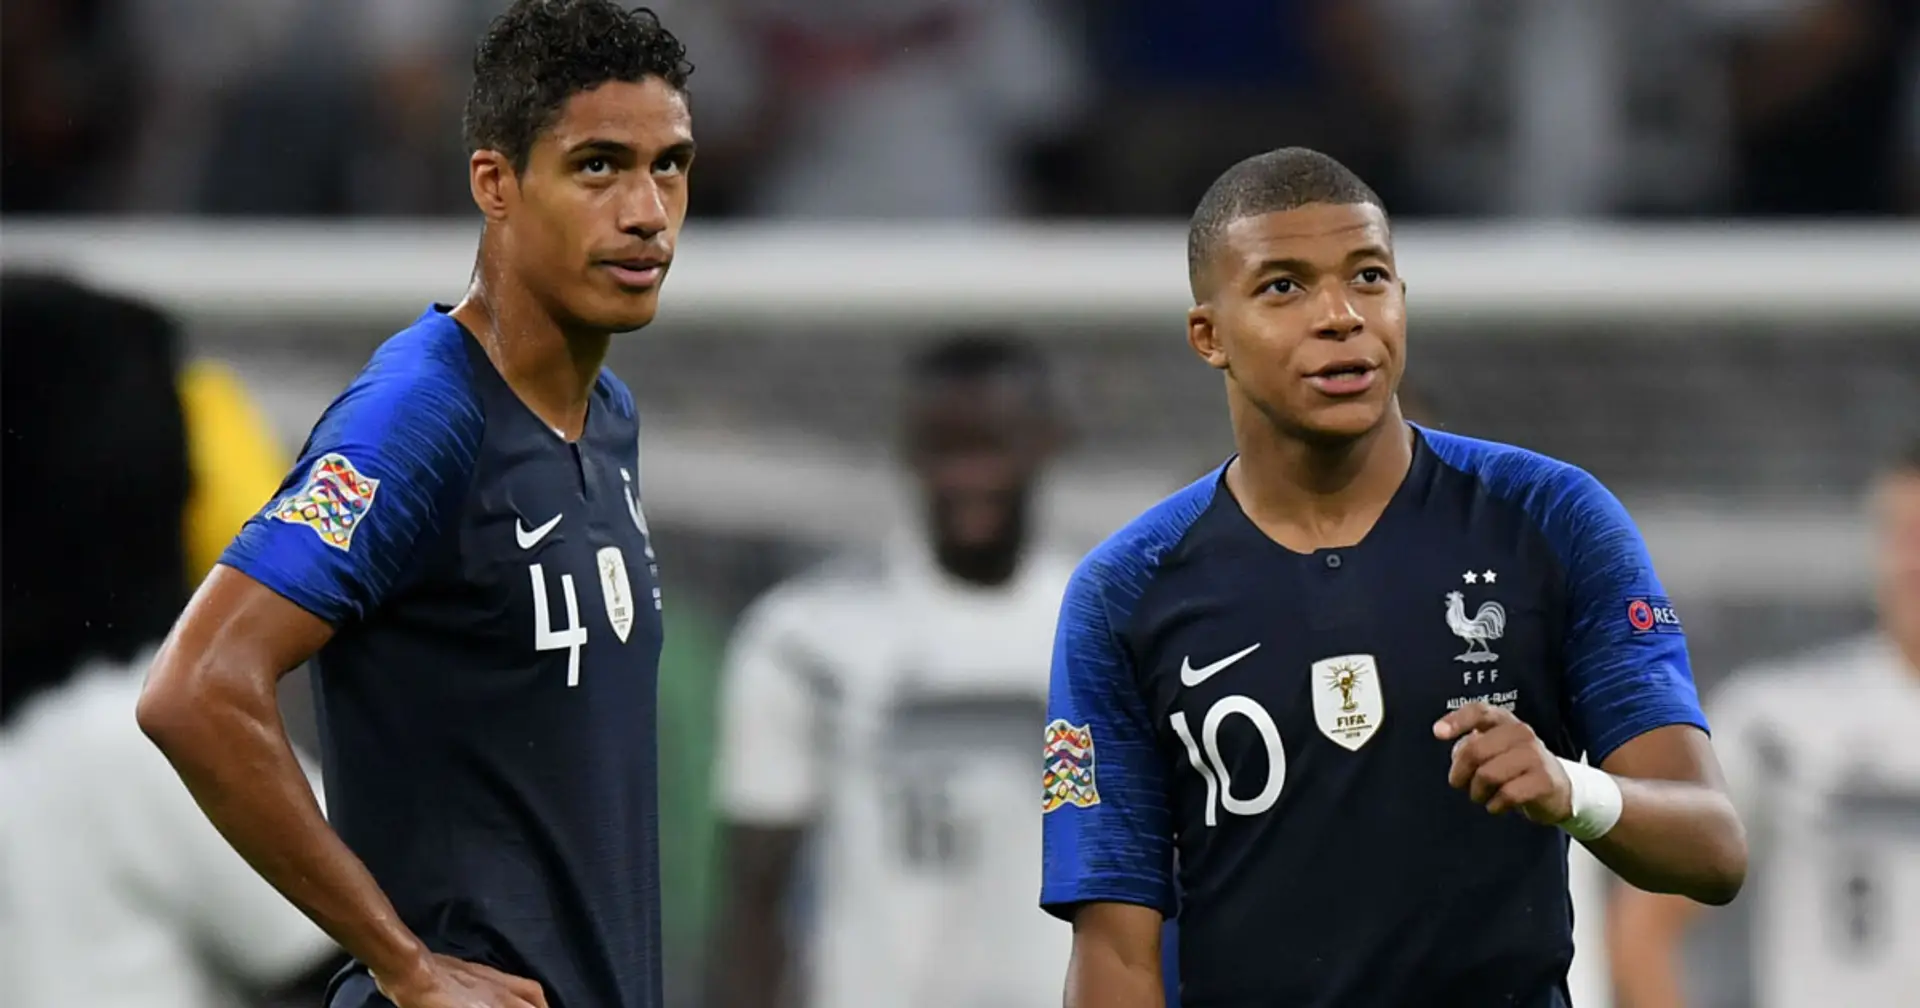 Madrid ‘to pay special attention’ to Varane and Mendy after Mbappe tests positive for Covid-19